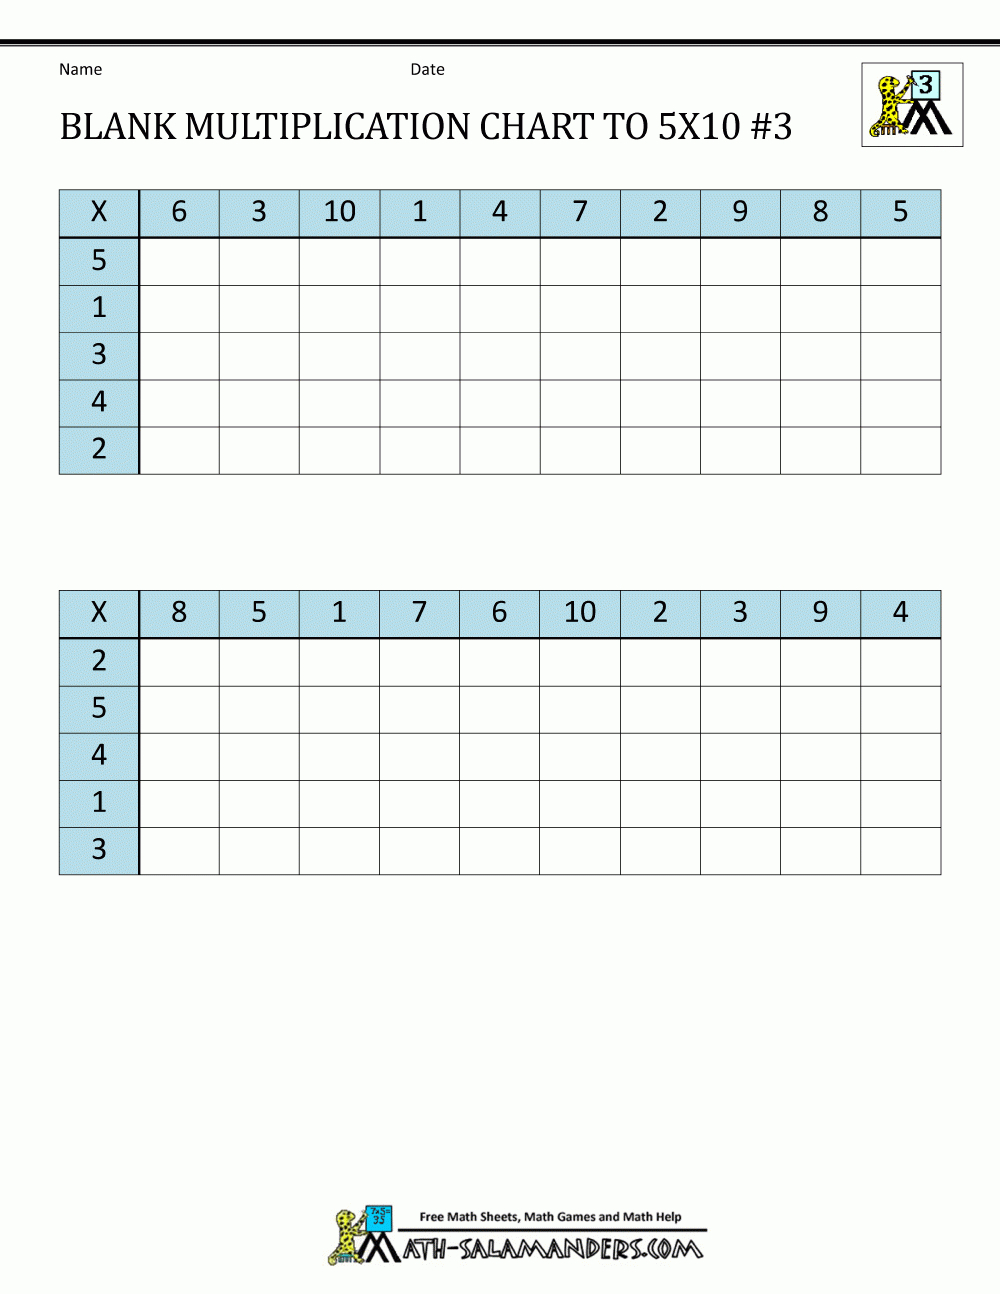 Blank Multiplication Chart Up To 10X10 inside Printable Blank Multiplication Chart 1-10